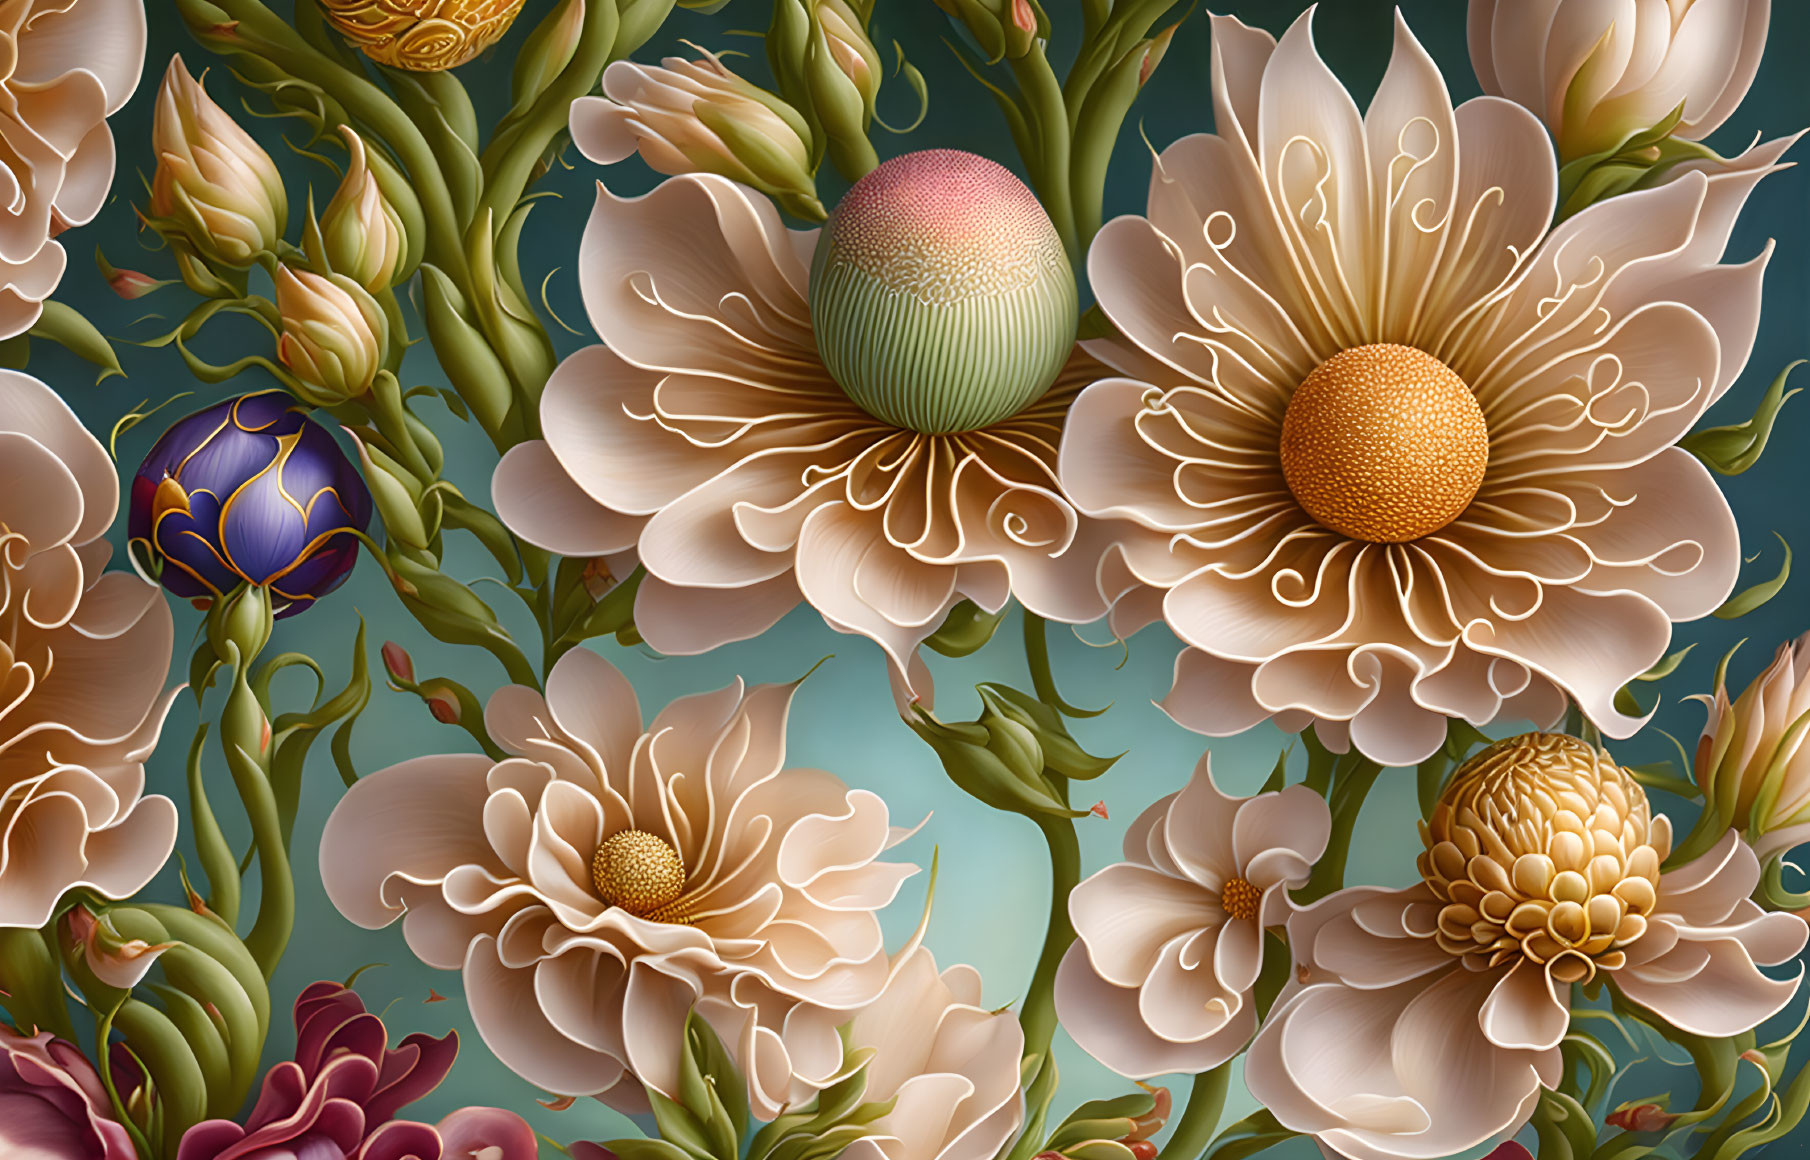 Detailed Beige Flowers with Easter Eggs on Teal Background